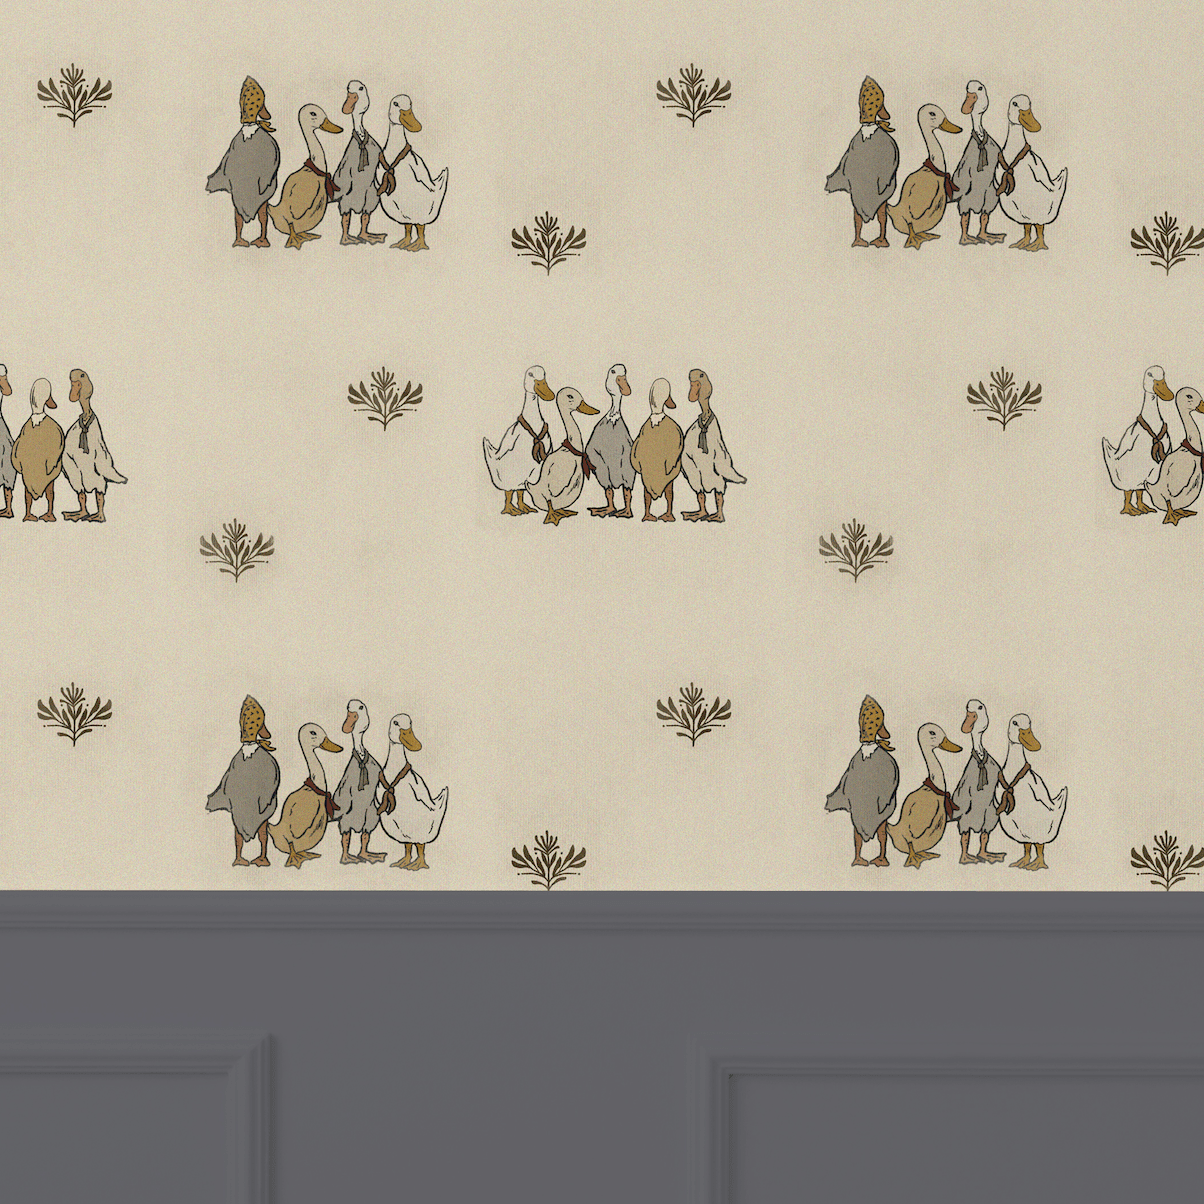 classic cute wallpaper with ducks for kids room decor, peel and stick, removable